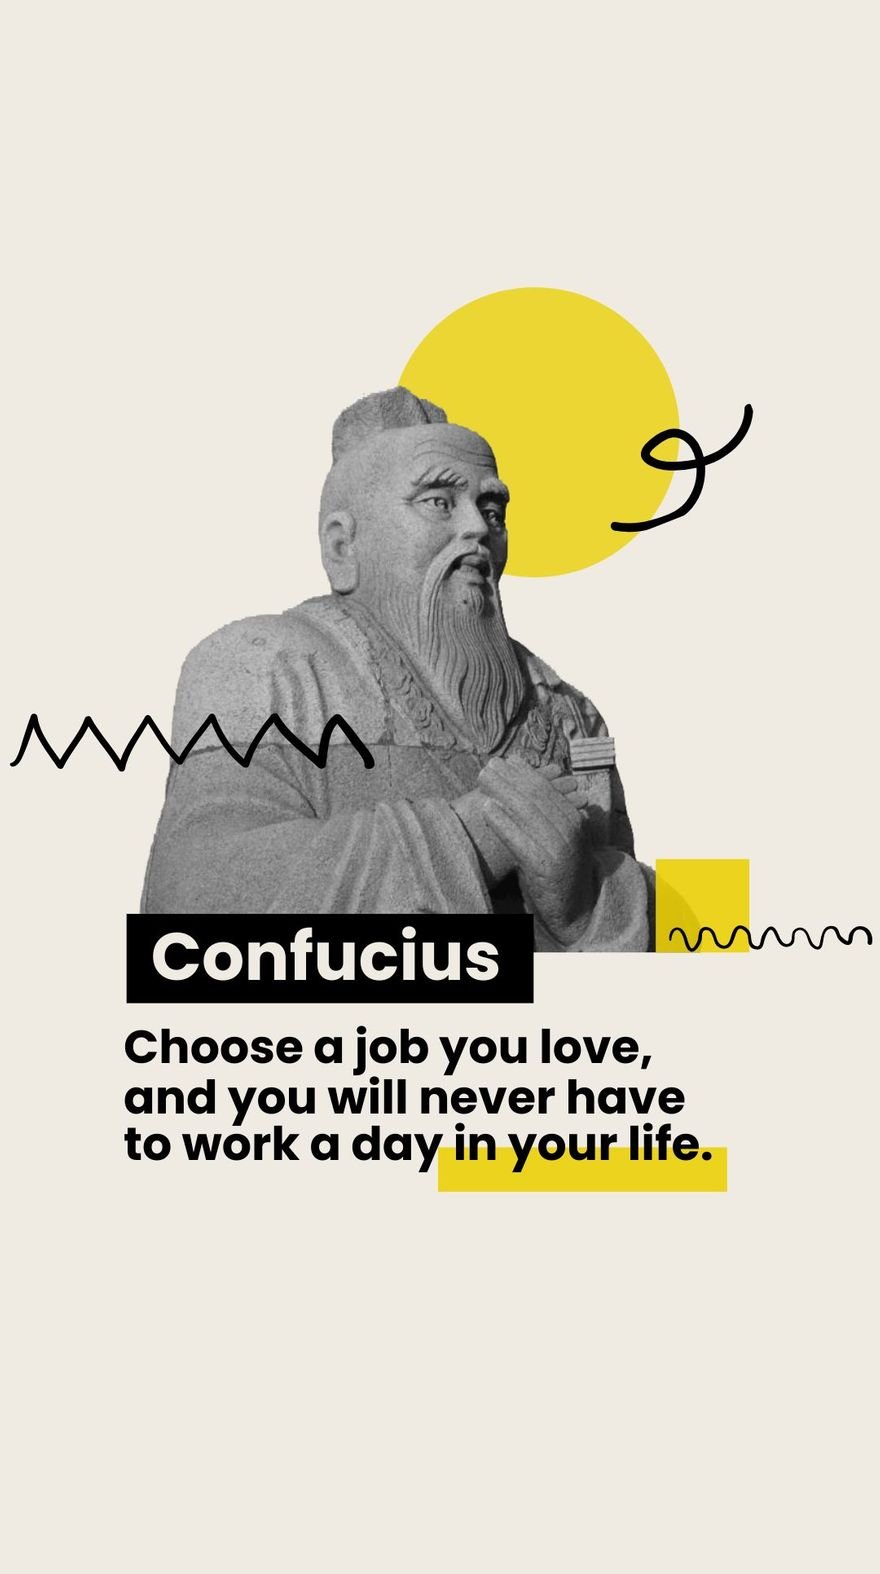 Free Confucius - Choose a job you love, and you will never have to work a day in your life.  